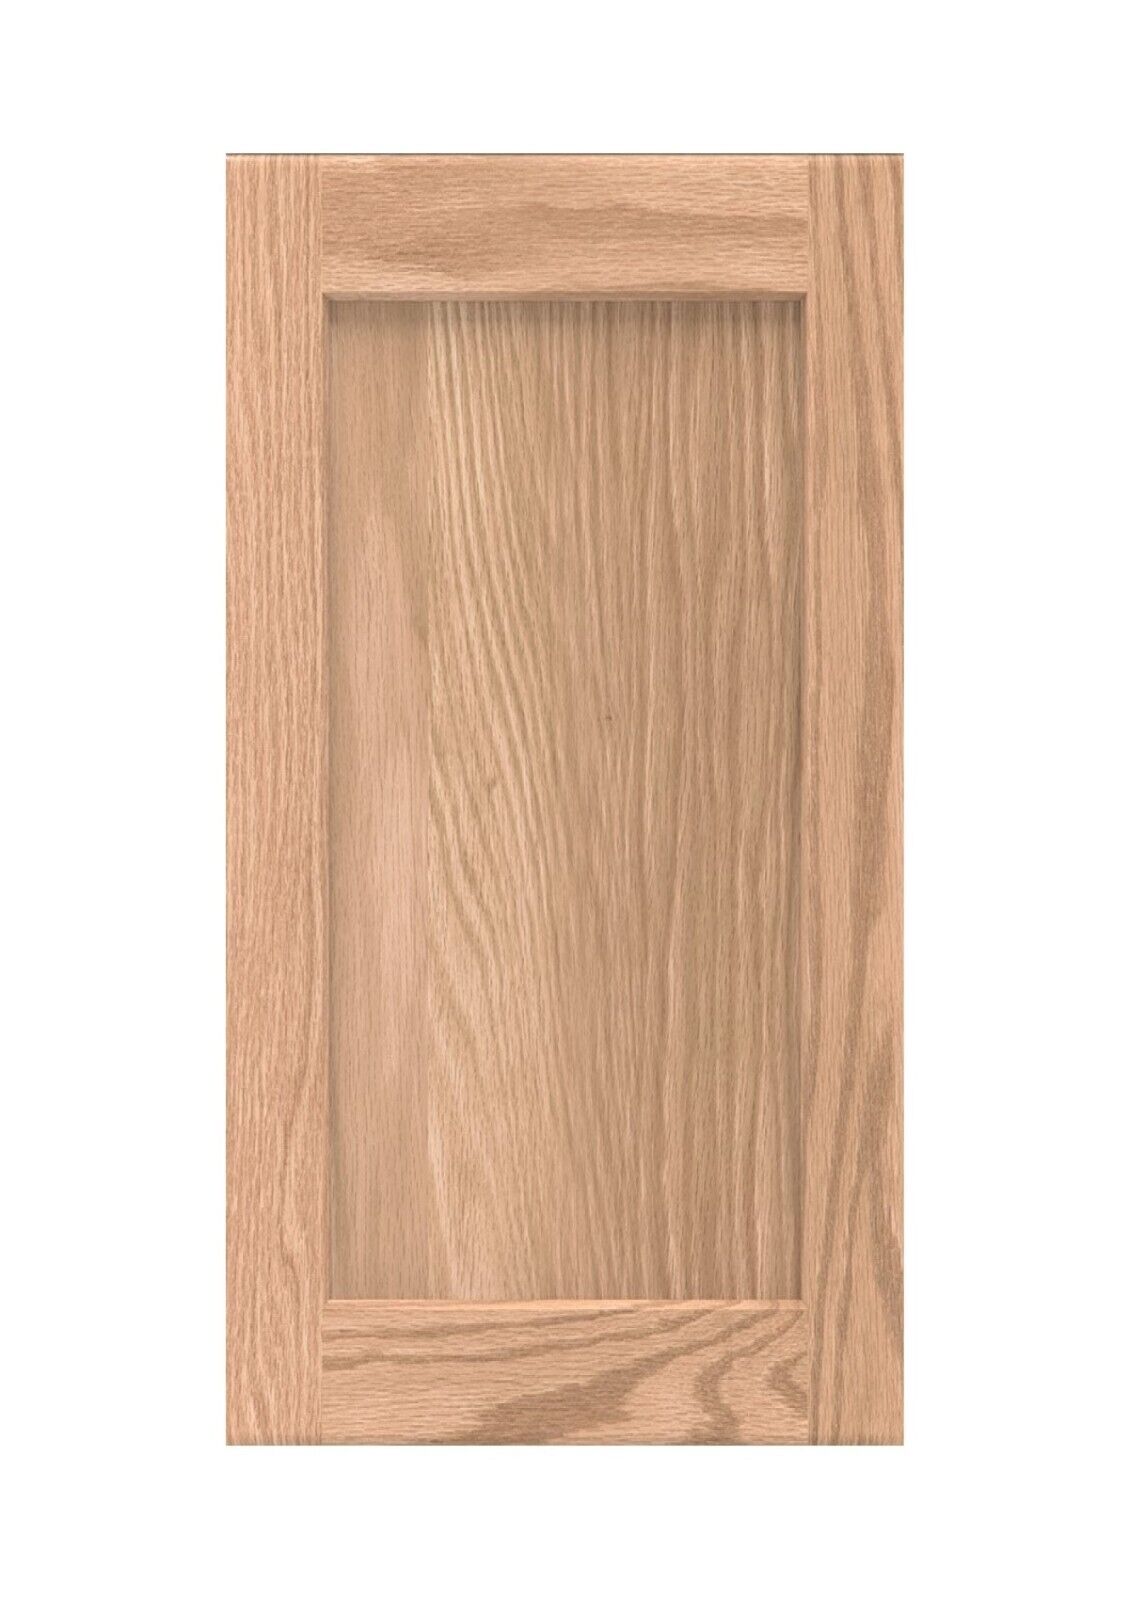 ONESTOCK Unfinished Kitchen Cabinet Door Front Replacements - Shaker Style